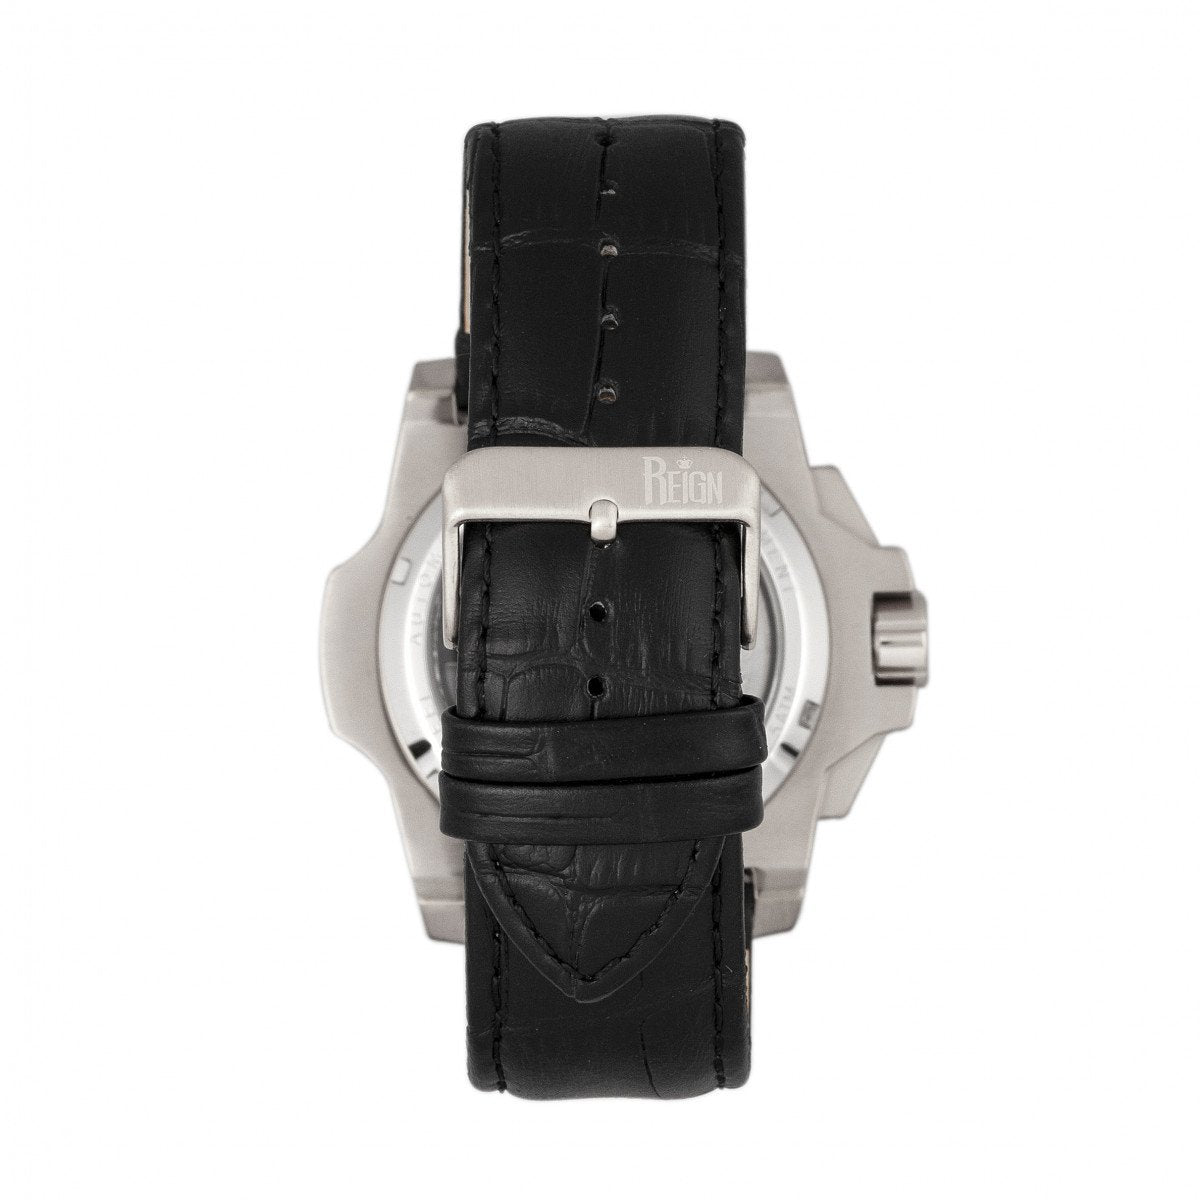 Reign Commodus Automatic Skeleton Leather-Band Watch - Silver/Black - REIRN4002